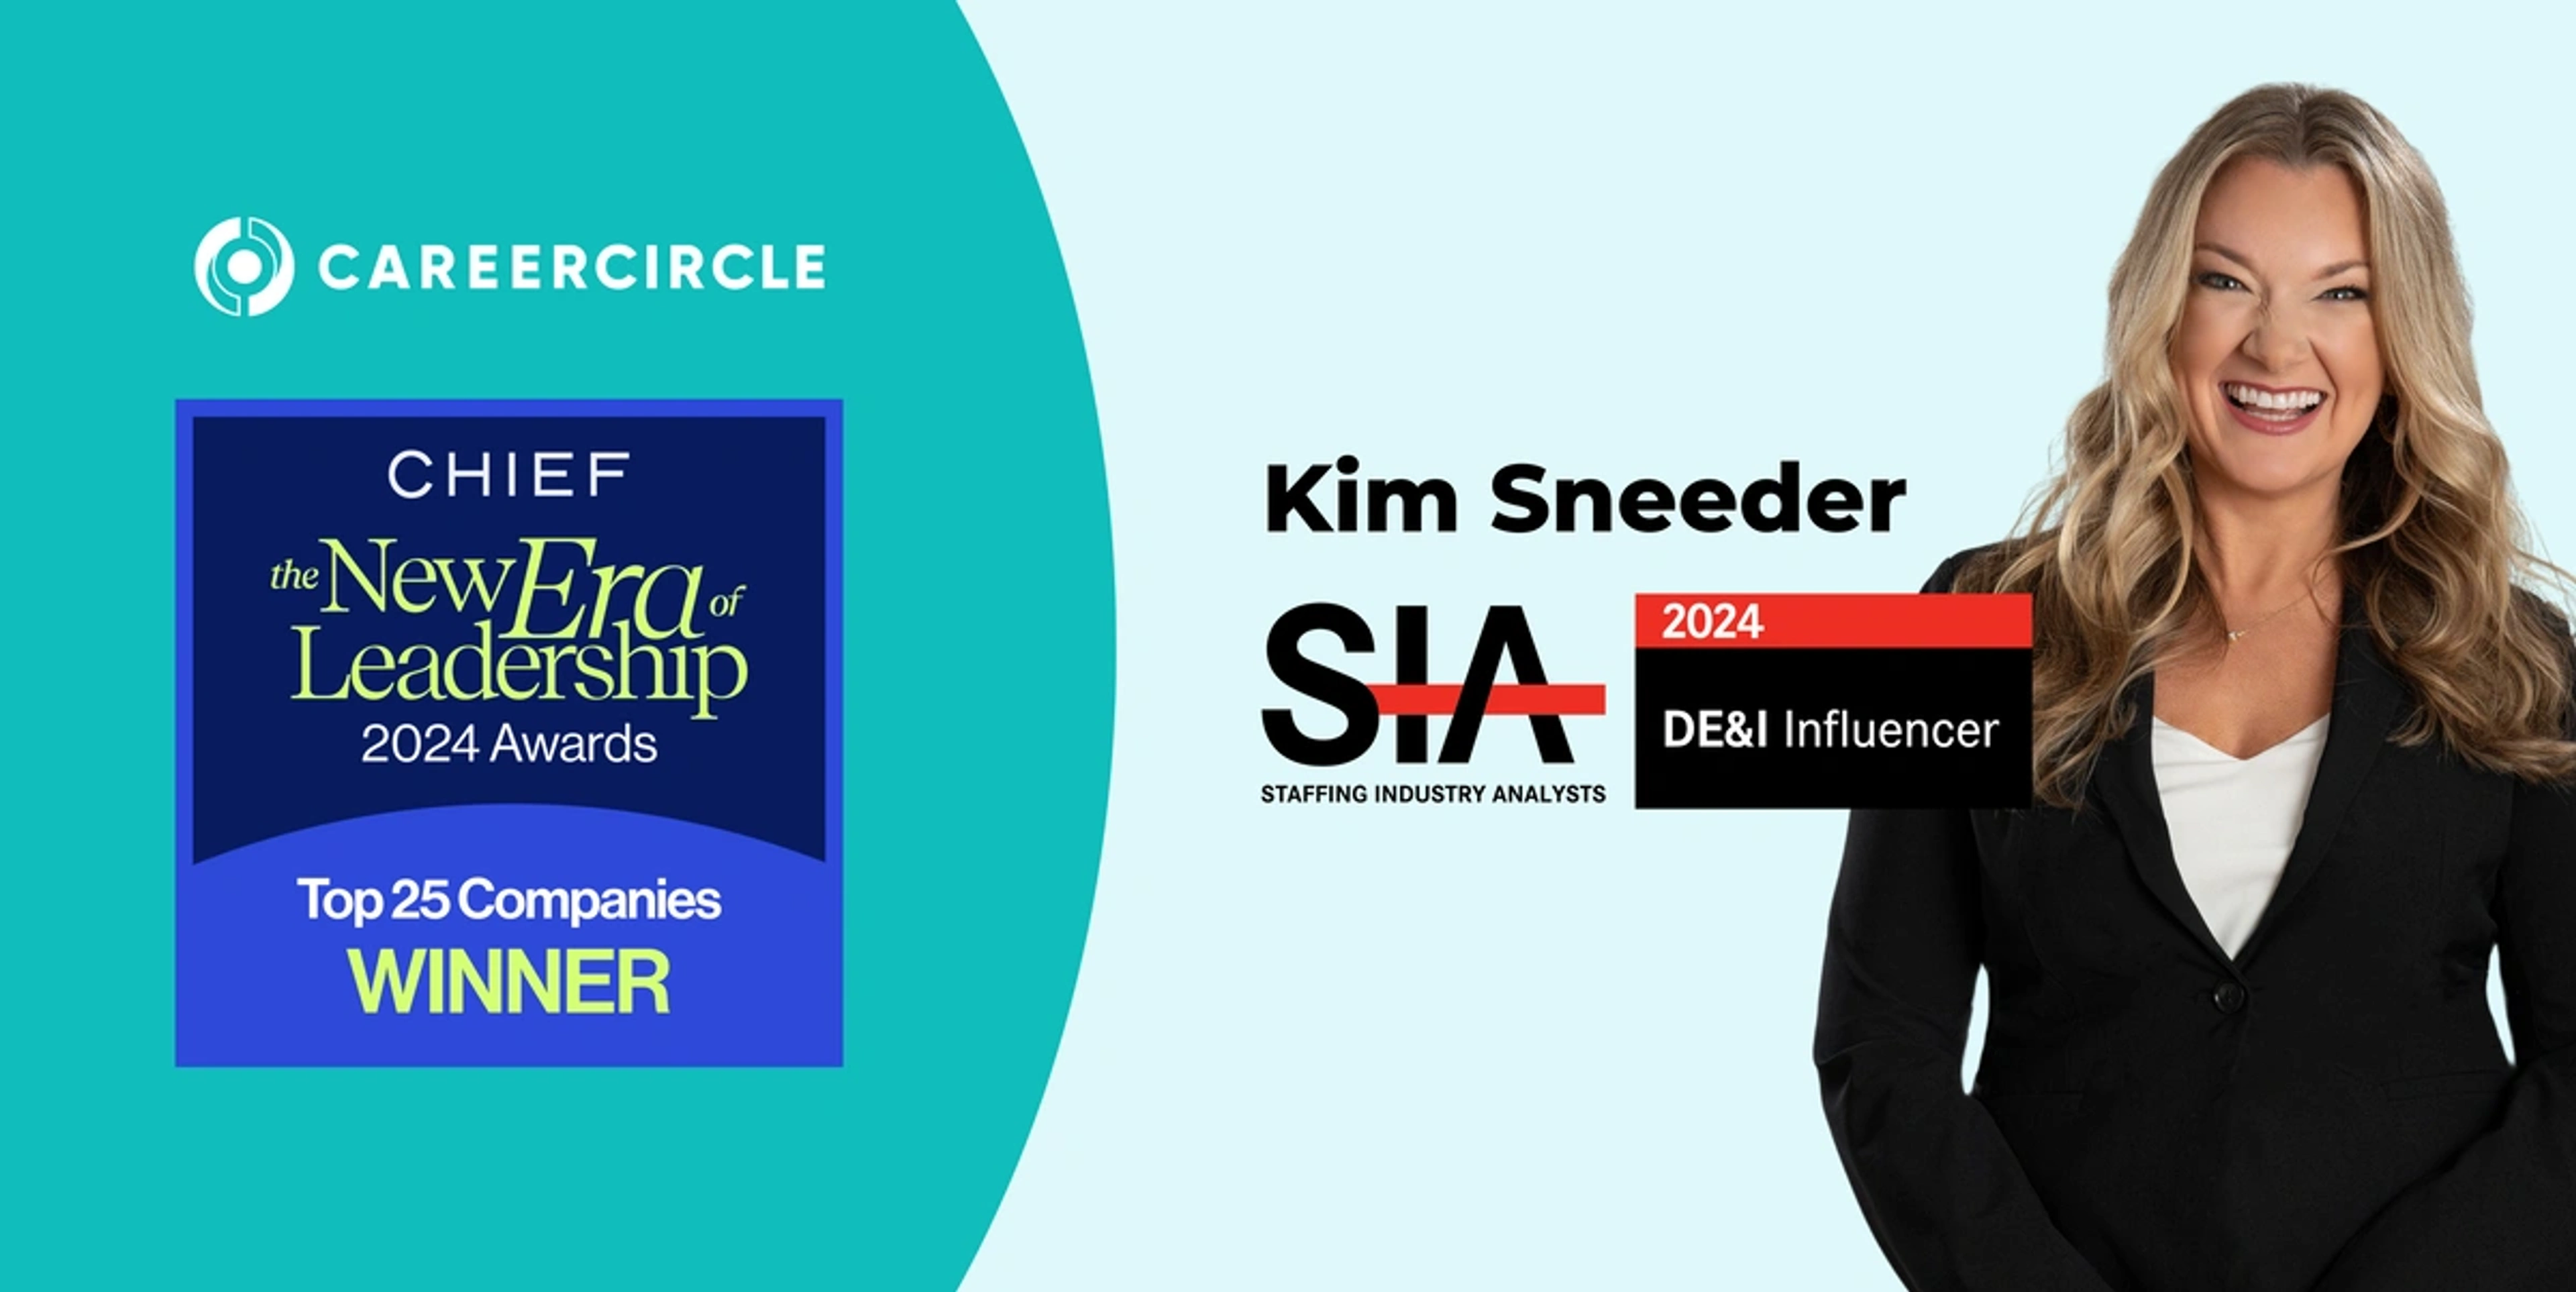 CareerCircle Recognized for Shaping the Future of Business by Chief and SIA